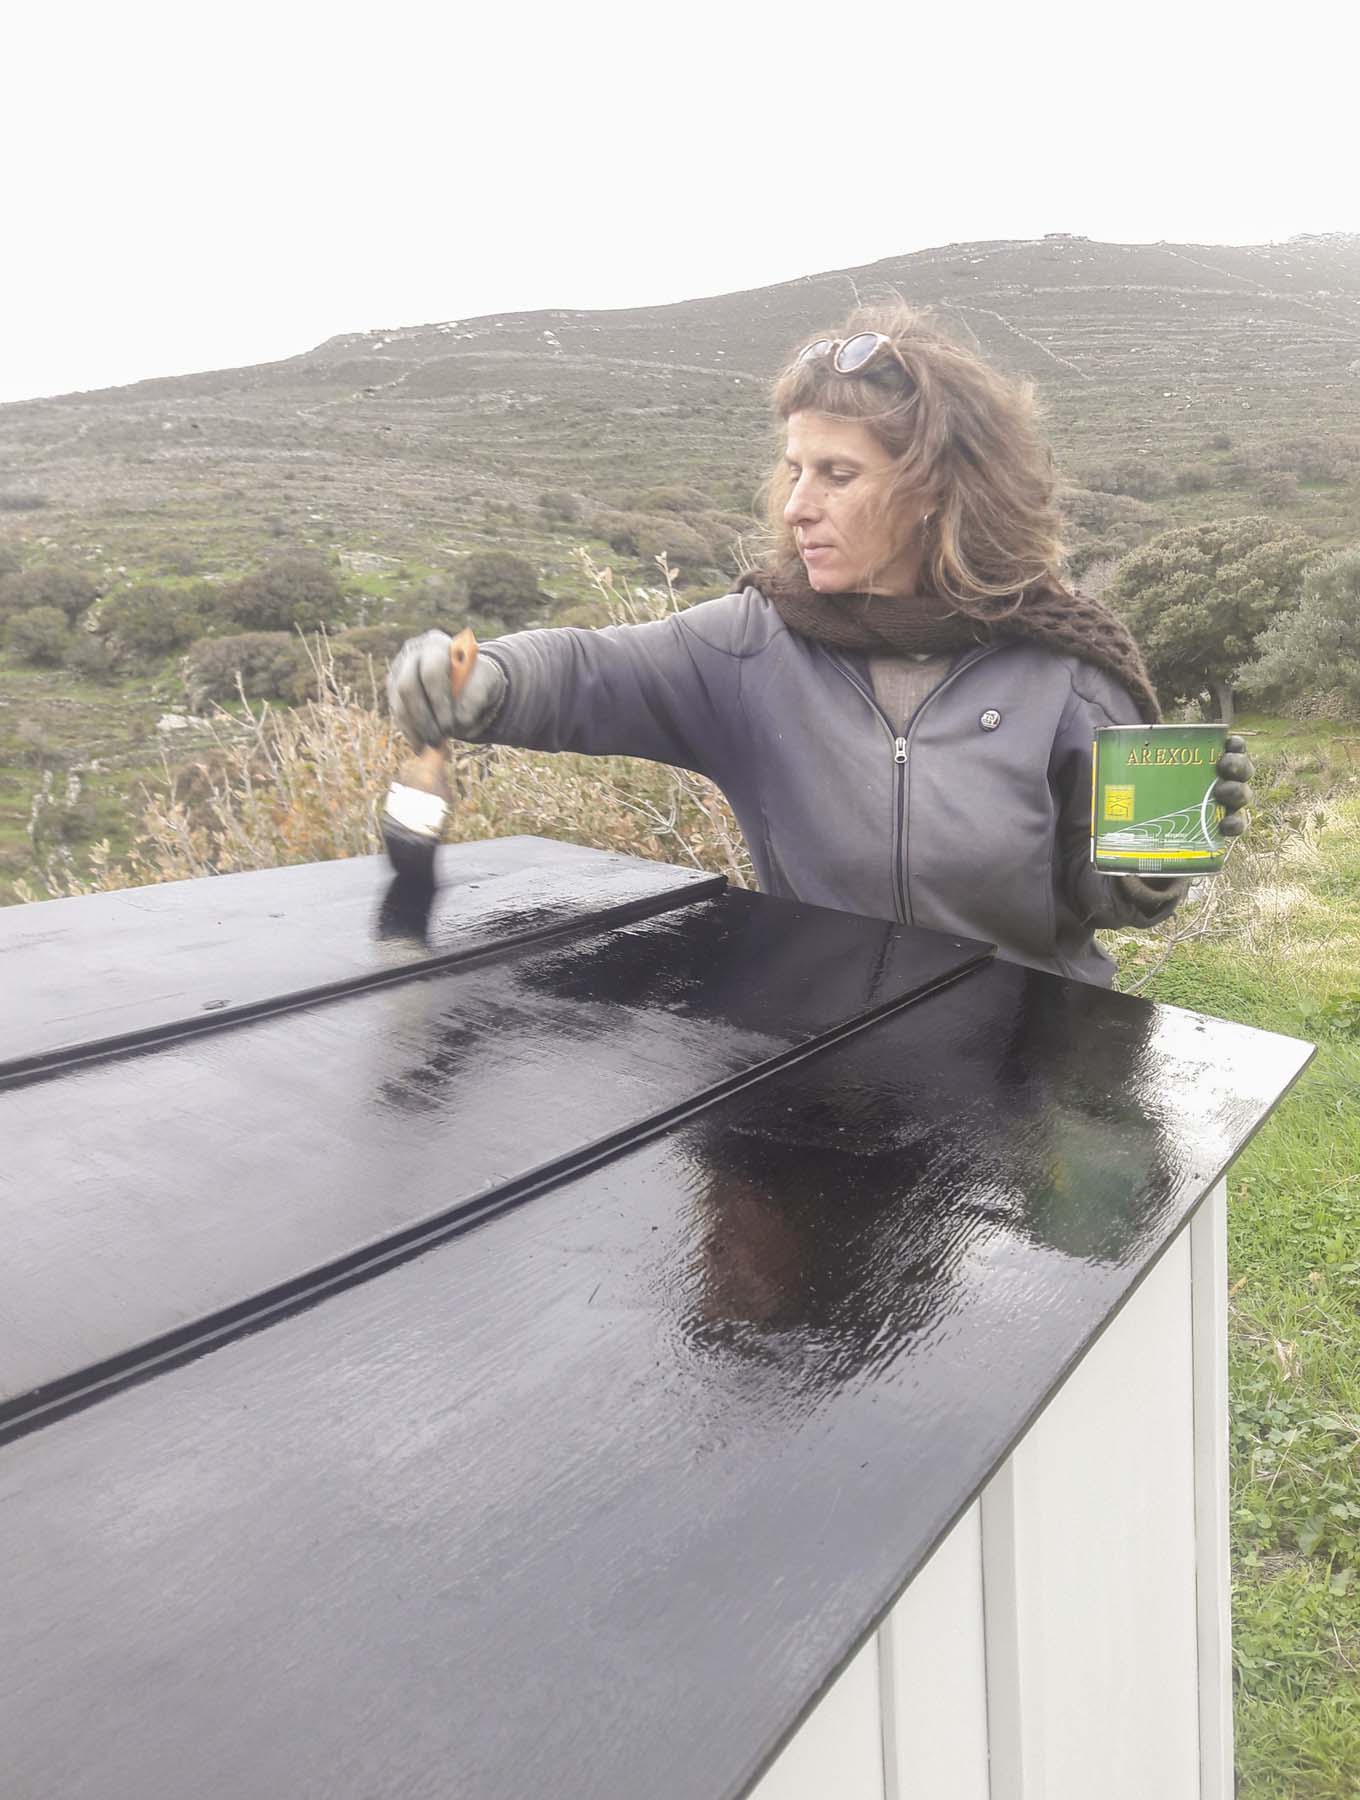 https://www.tinosecolodge.gr/cms/wp-content/uploads/2017/12/tinos-ecolodge-solar-herb-dryer-dehydrator-2017-_6.jpg